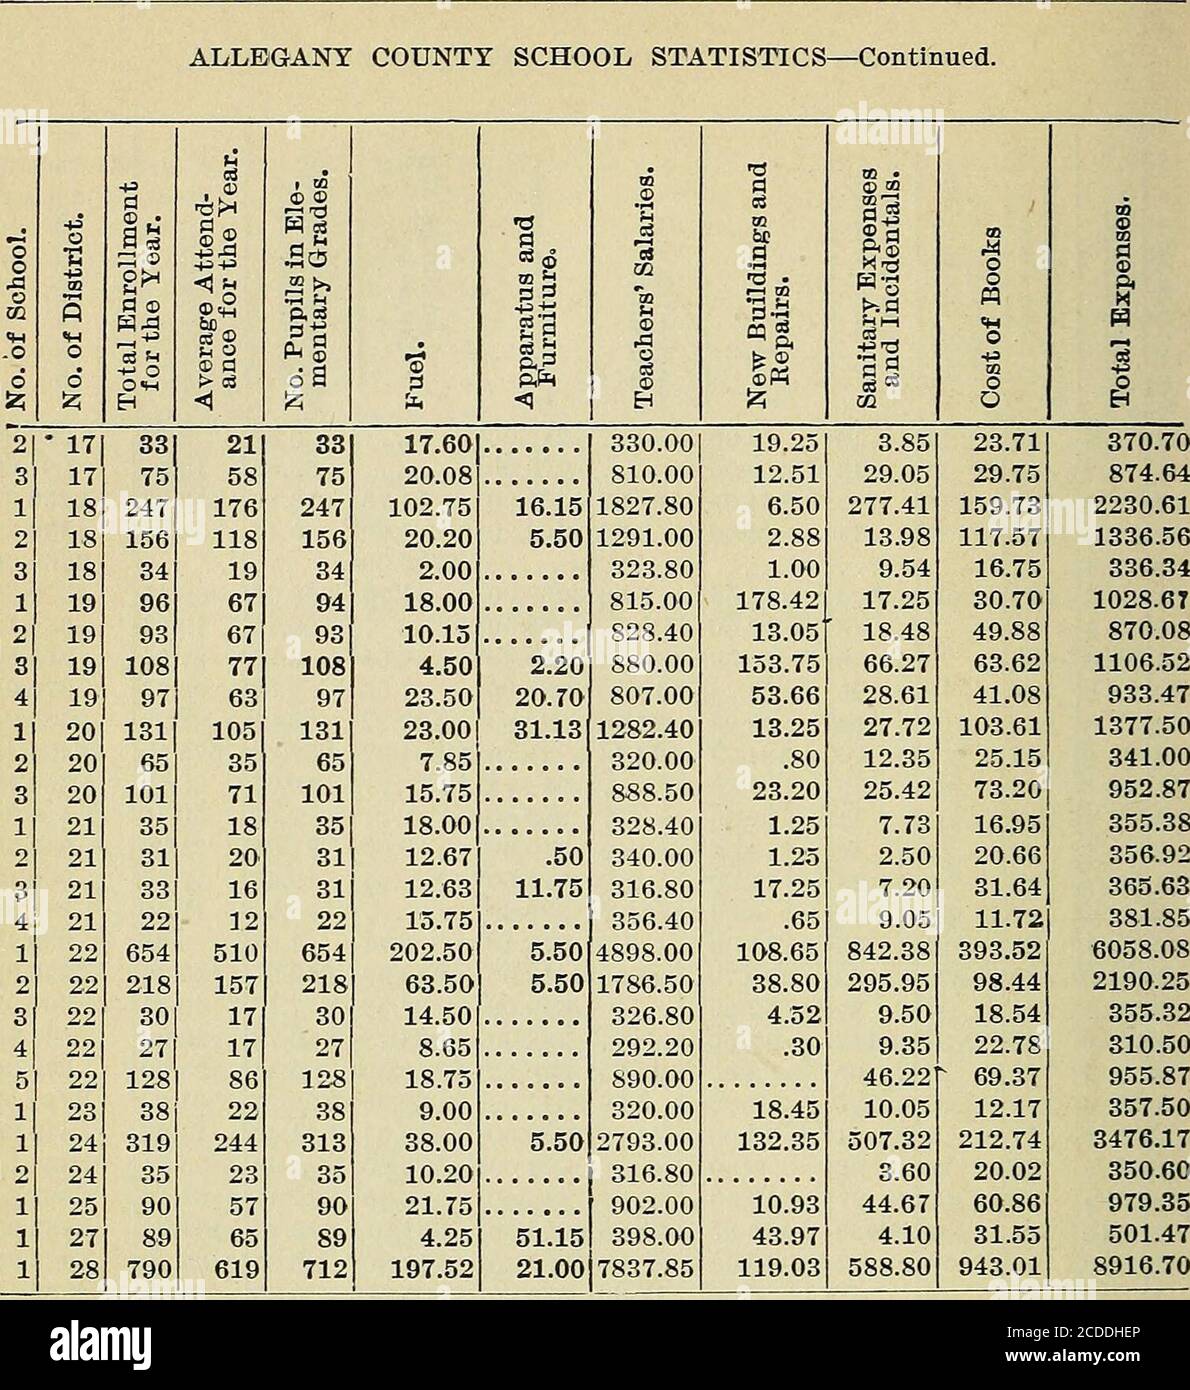 . Department of Public Education State of Maryland Forty-Third Annual Report Showing Condition of the Public Schools of Maryland for the Year Ending July 31st, 1909. . .40 16.77 30.85 11.25 6.60 3.75 7.90 25.68 58.13 314.40753.40 28.00 3.80 65.65 513.89 9.17 8.71 13.80 453.37 88.04 356.36 6.15 9.35 8.60 460.08 832.60 10.05 7.30 11.20 9.40 .20 1.05 356.37 7.13 10.7 5.45 509.27 11.45 2.45 12.17 419.42 46.37 6.85 4.35 7.27 9.44 424.77 17.36 417.74 19.90 6.85 5.40 4.10 438.79 47.57 2.00 2.45 43.62 1.15 13.00 5.60 .75 2.45 46.17 308.1819.3427.9544.7362.29 573.5925.7550.1821.3617.5712.469.68 466.264 Stock Photo